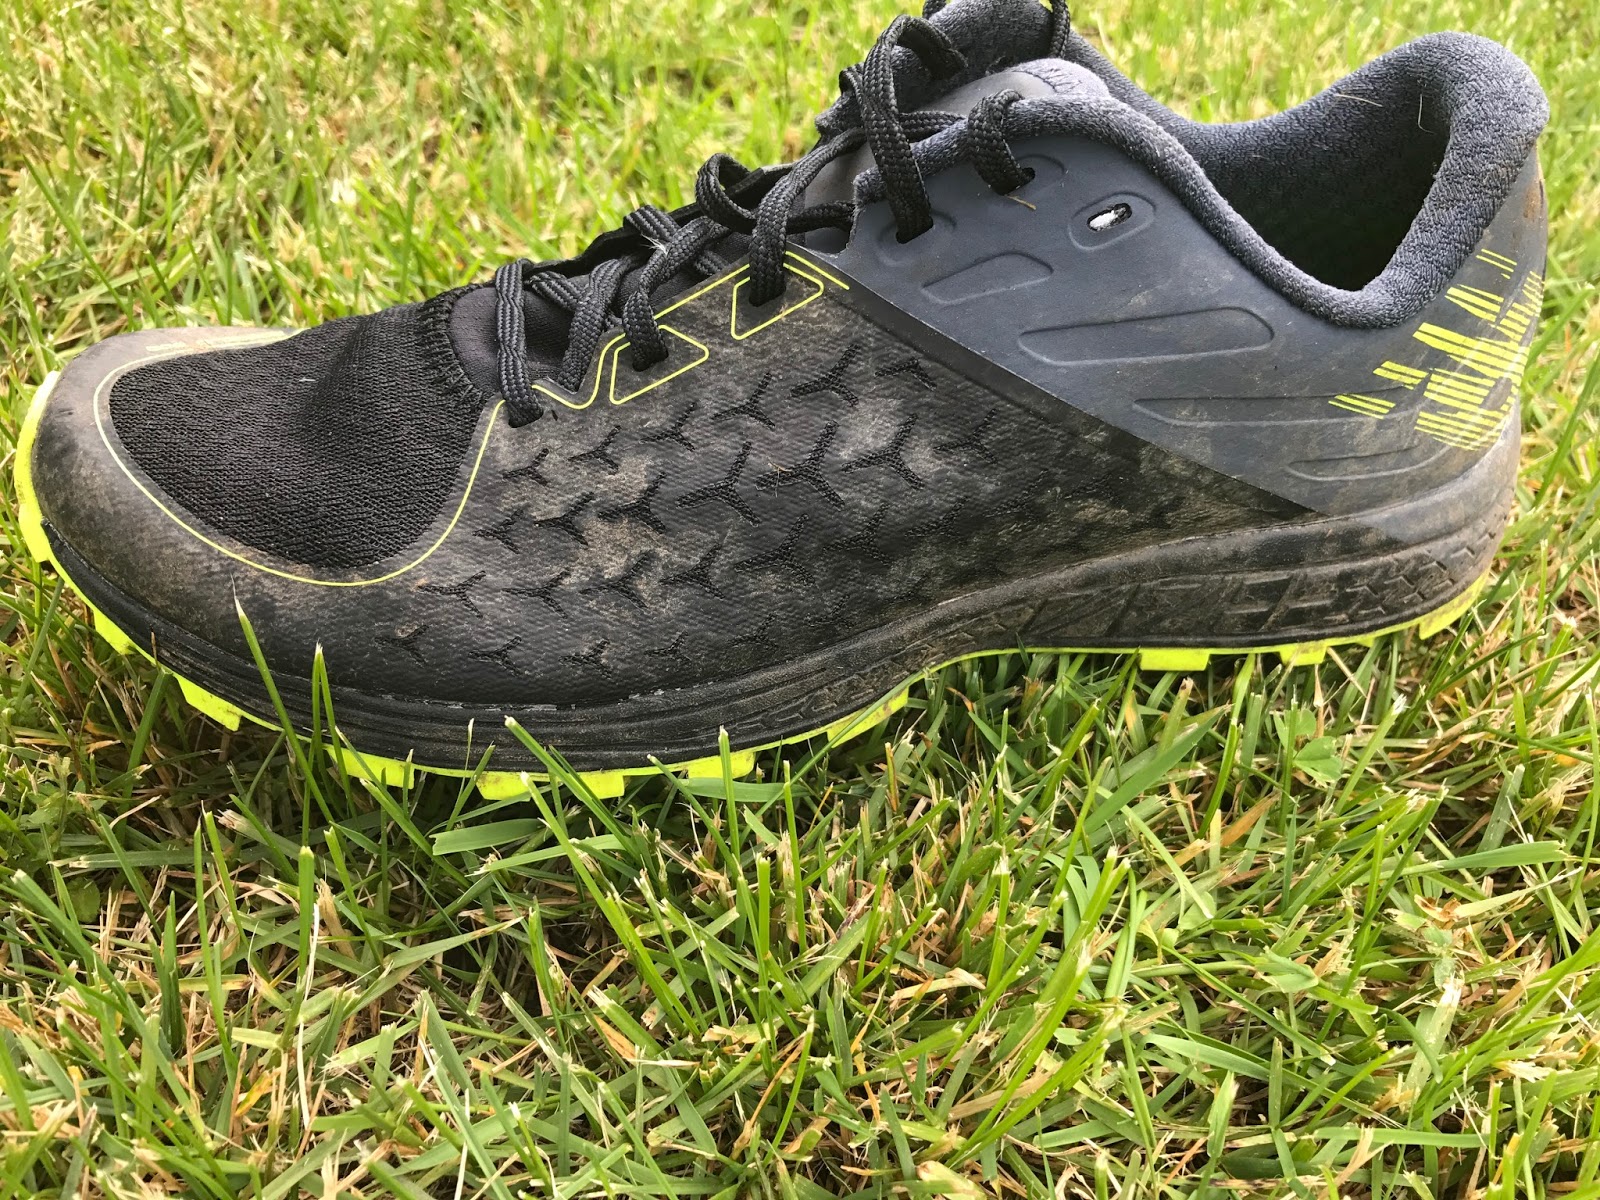 Incienso Pies suaves Elocuente Road Trail Run: New Balance Vazee Summit Trail v2 Review: Fun, Very Light,  Fast, & Versatile Trail Runner